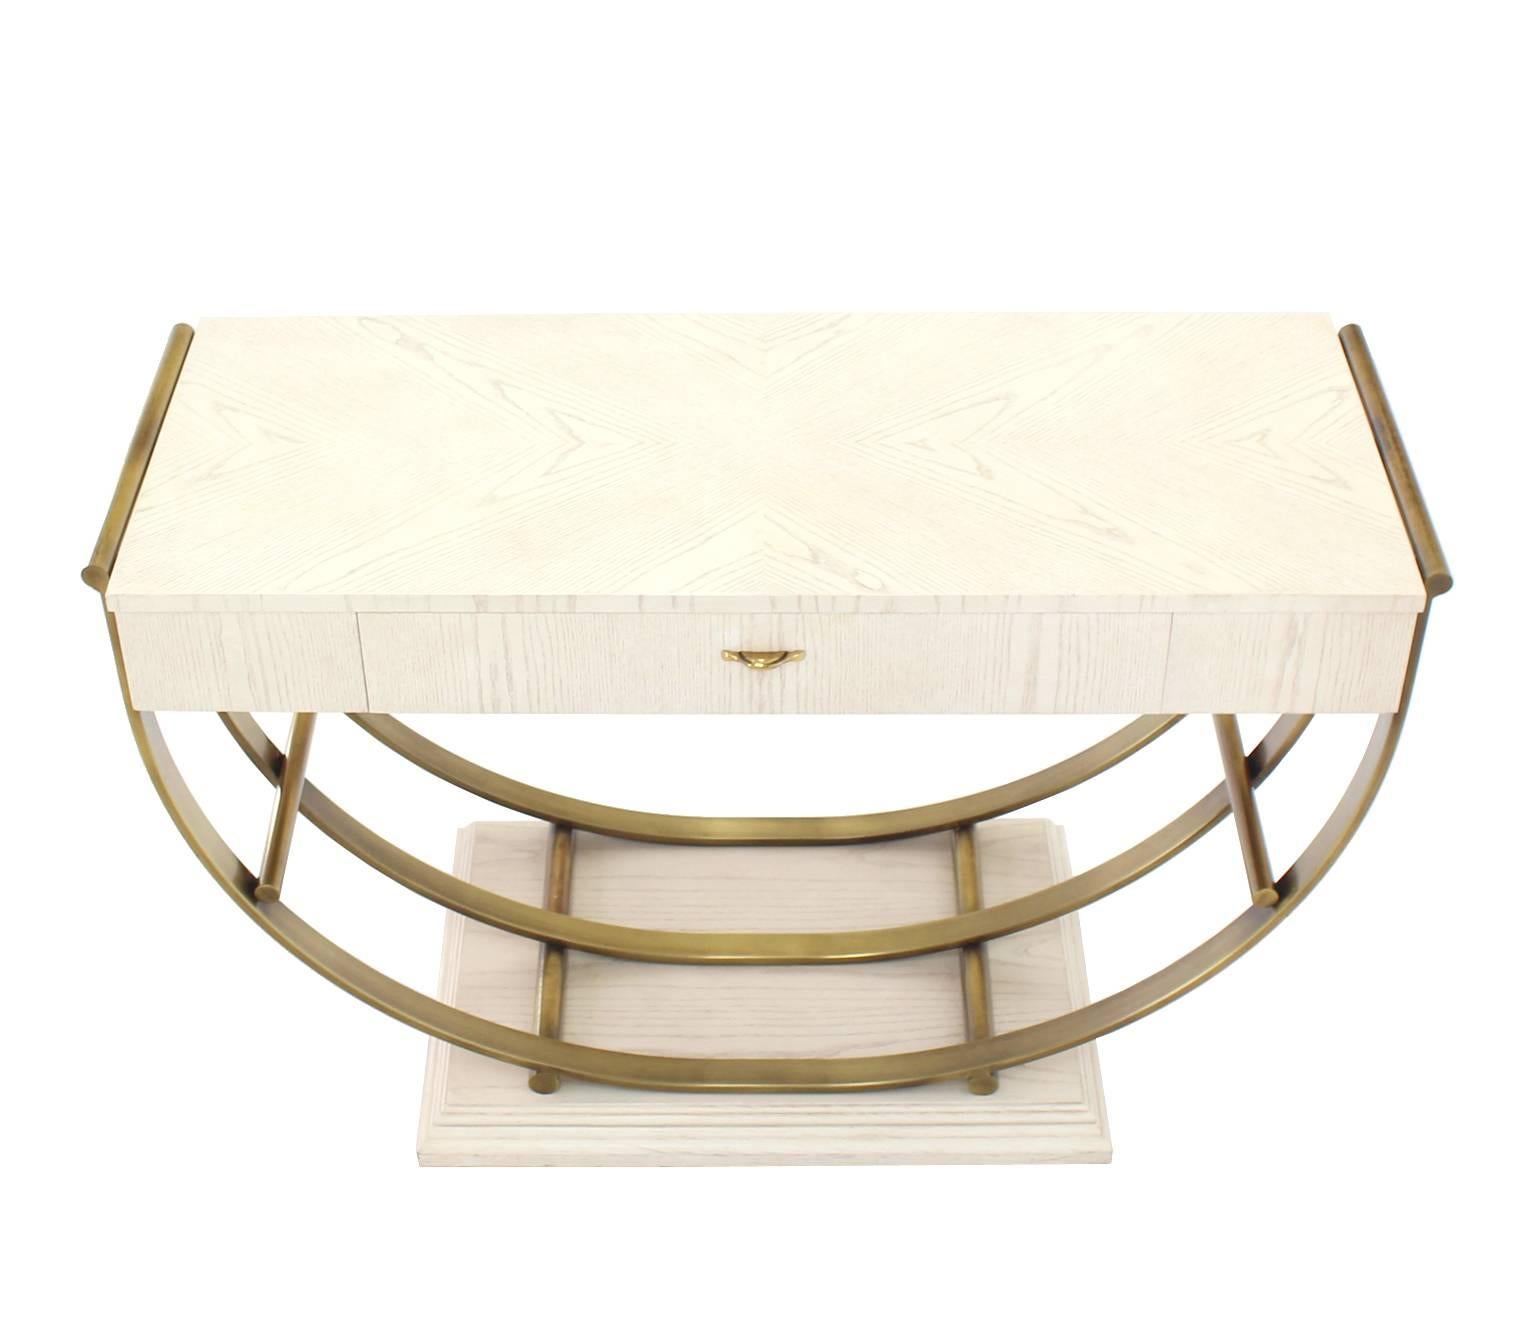 White Pickled Oak Finish Brass U Shape Base Console Table In Excellent Condition For Sale In Rockaway, NJ